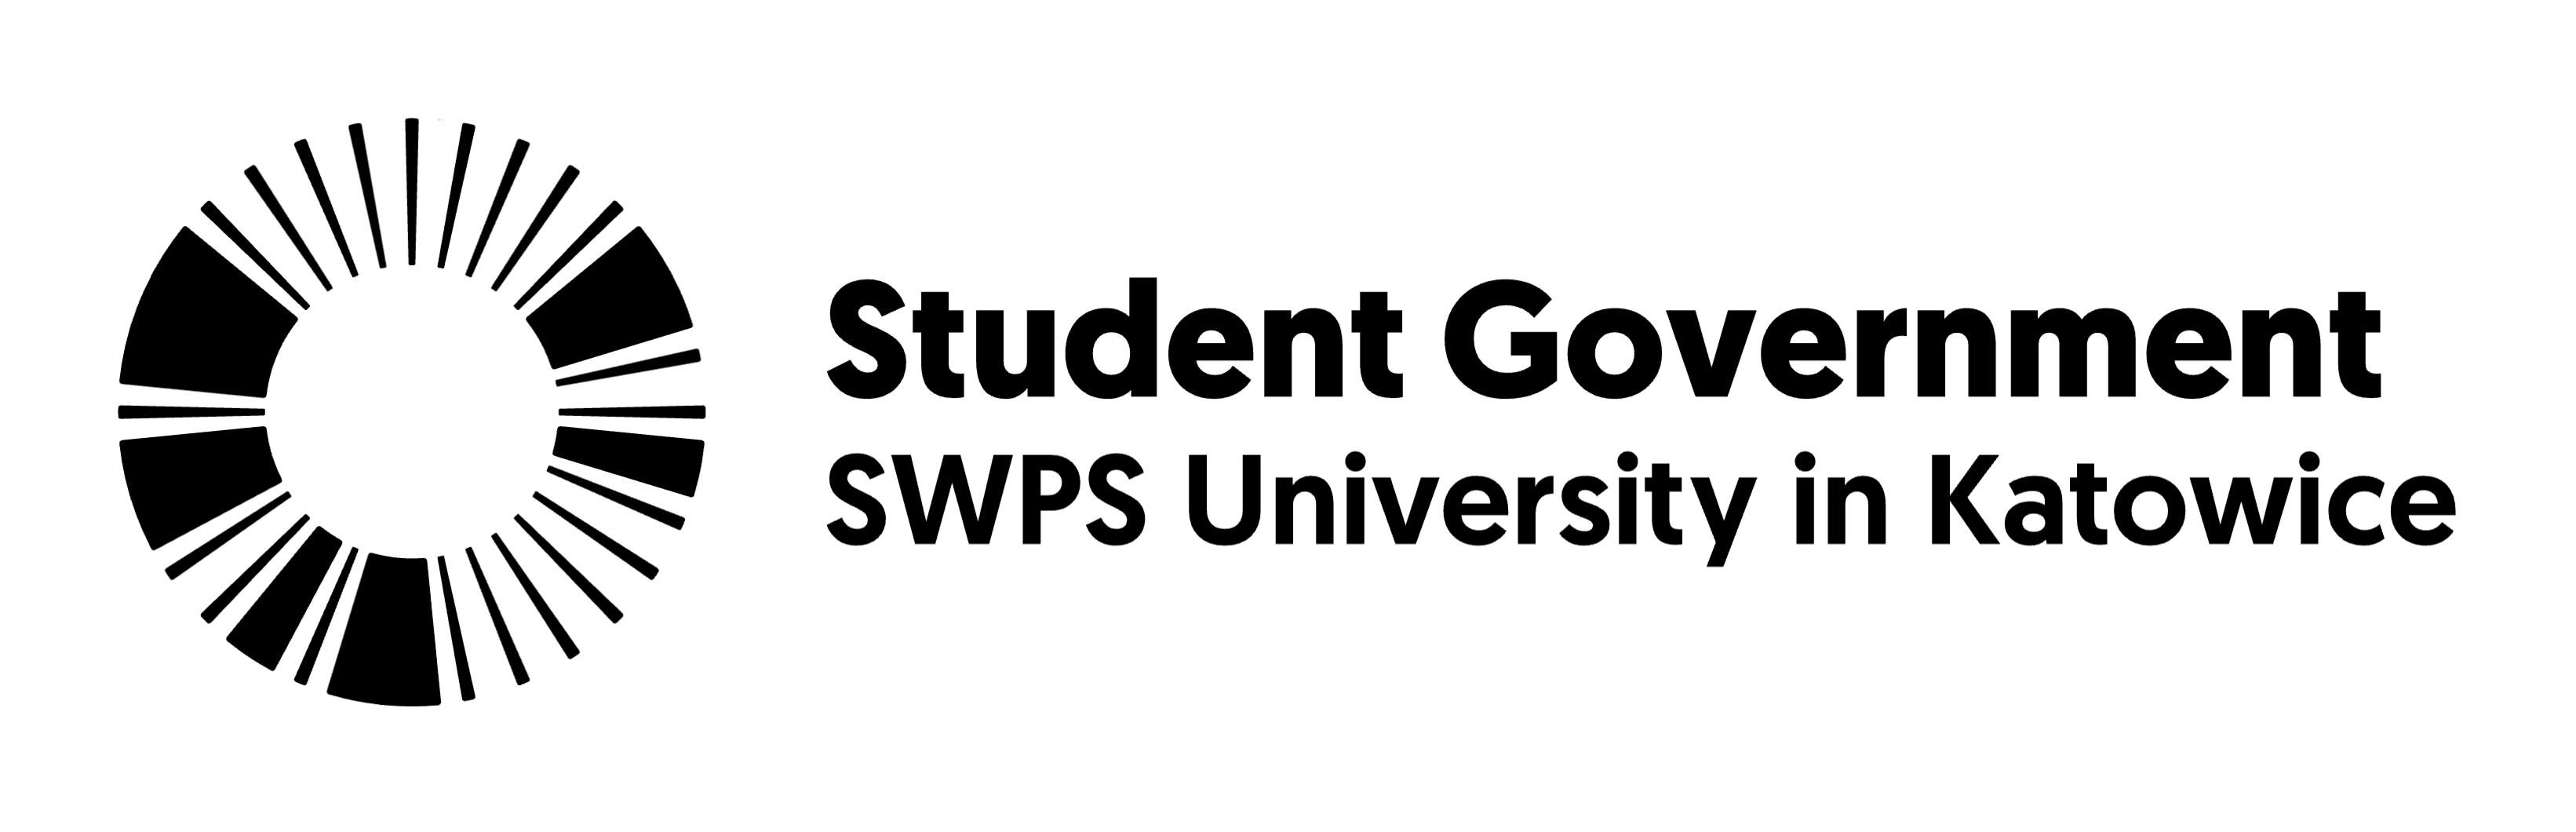 Student government at SWPS University in Katowice